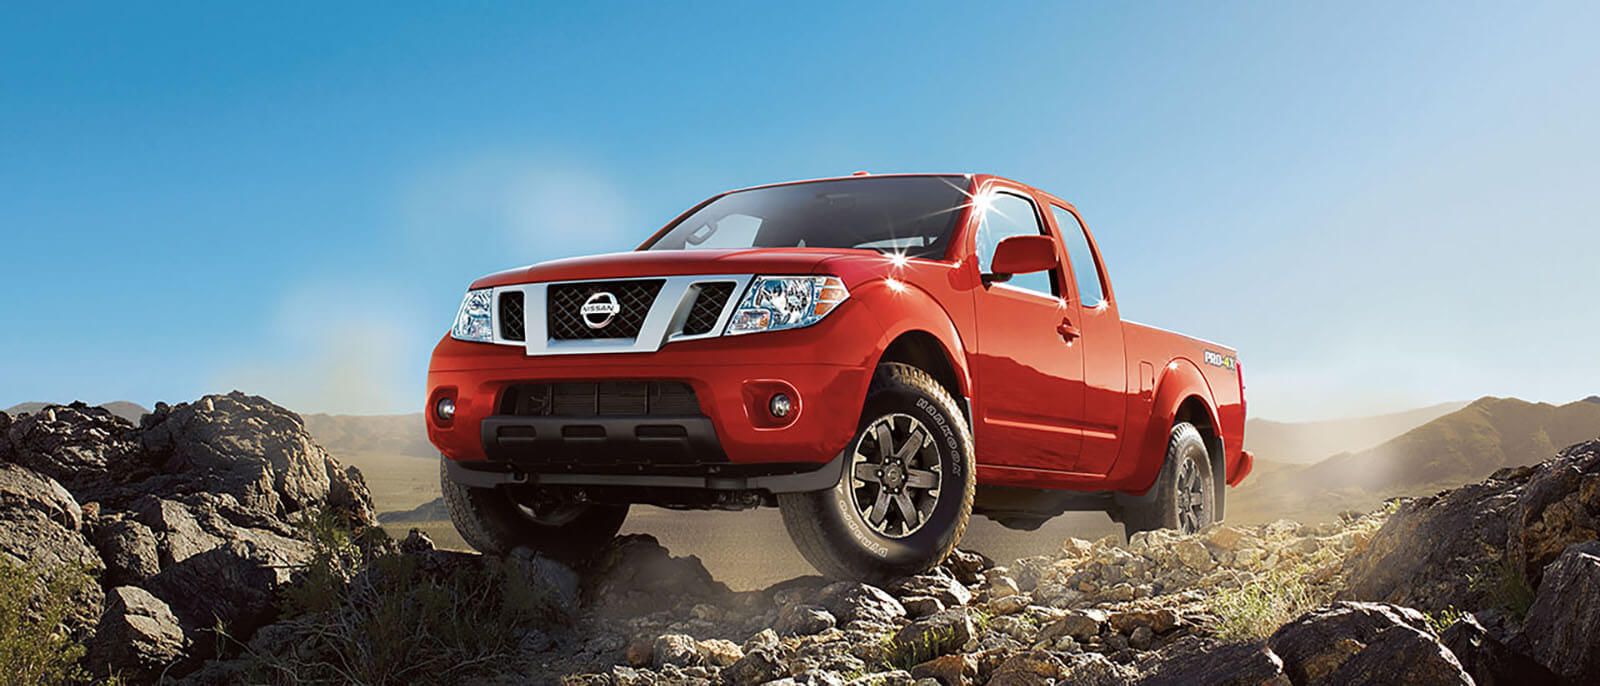 2017 Nissan Frontier driving on rocks with a blue sky background